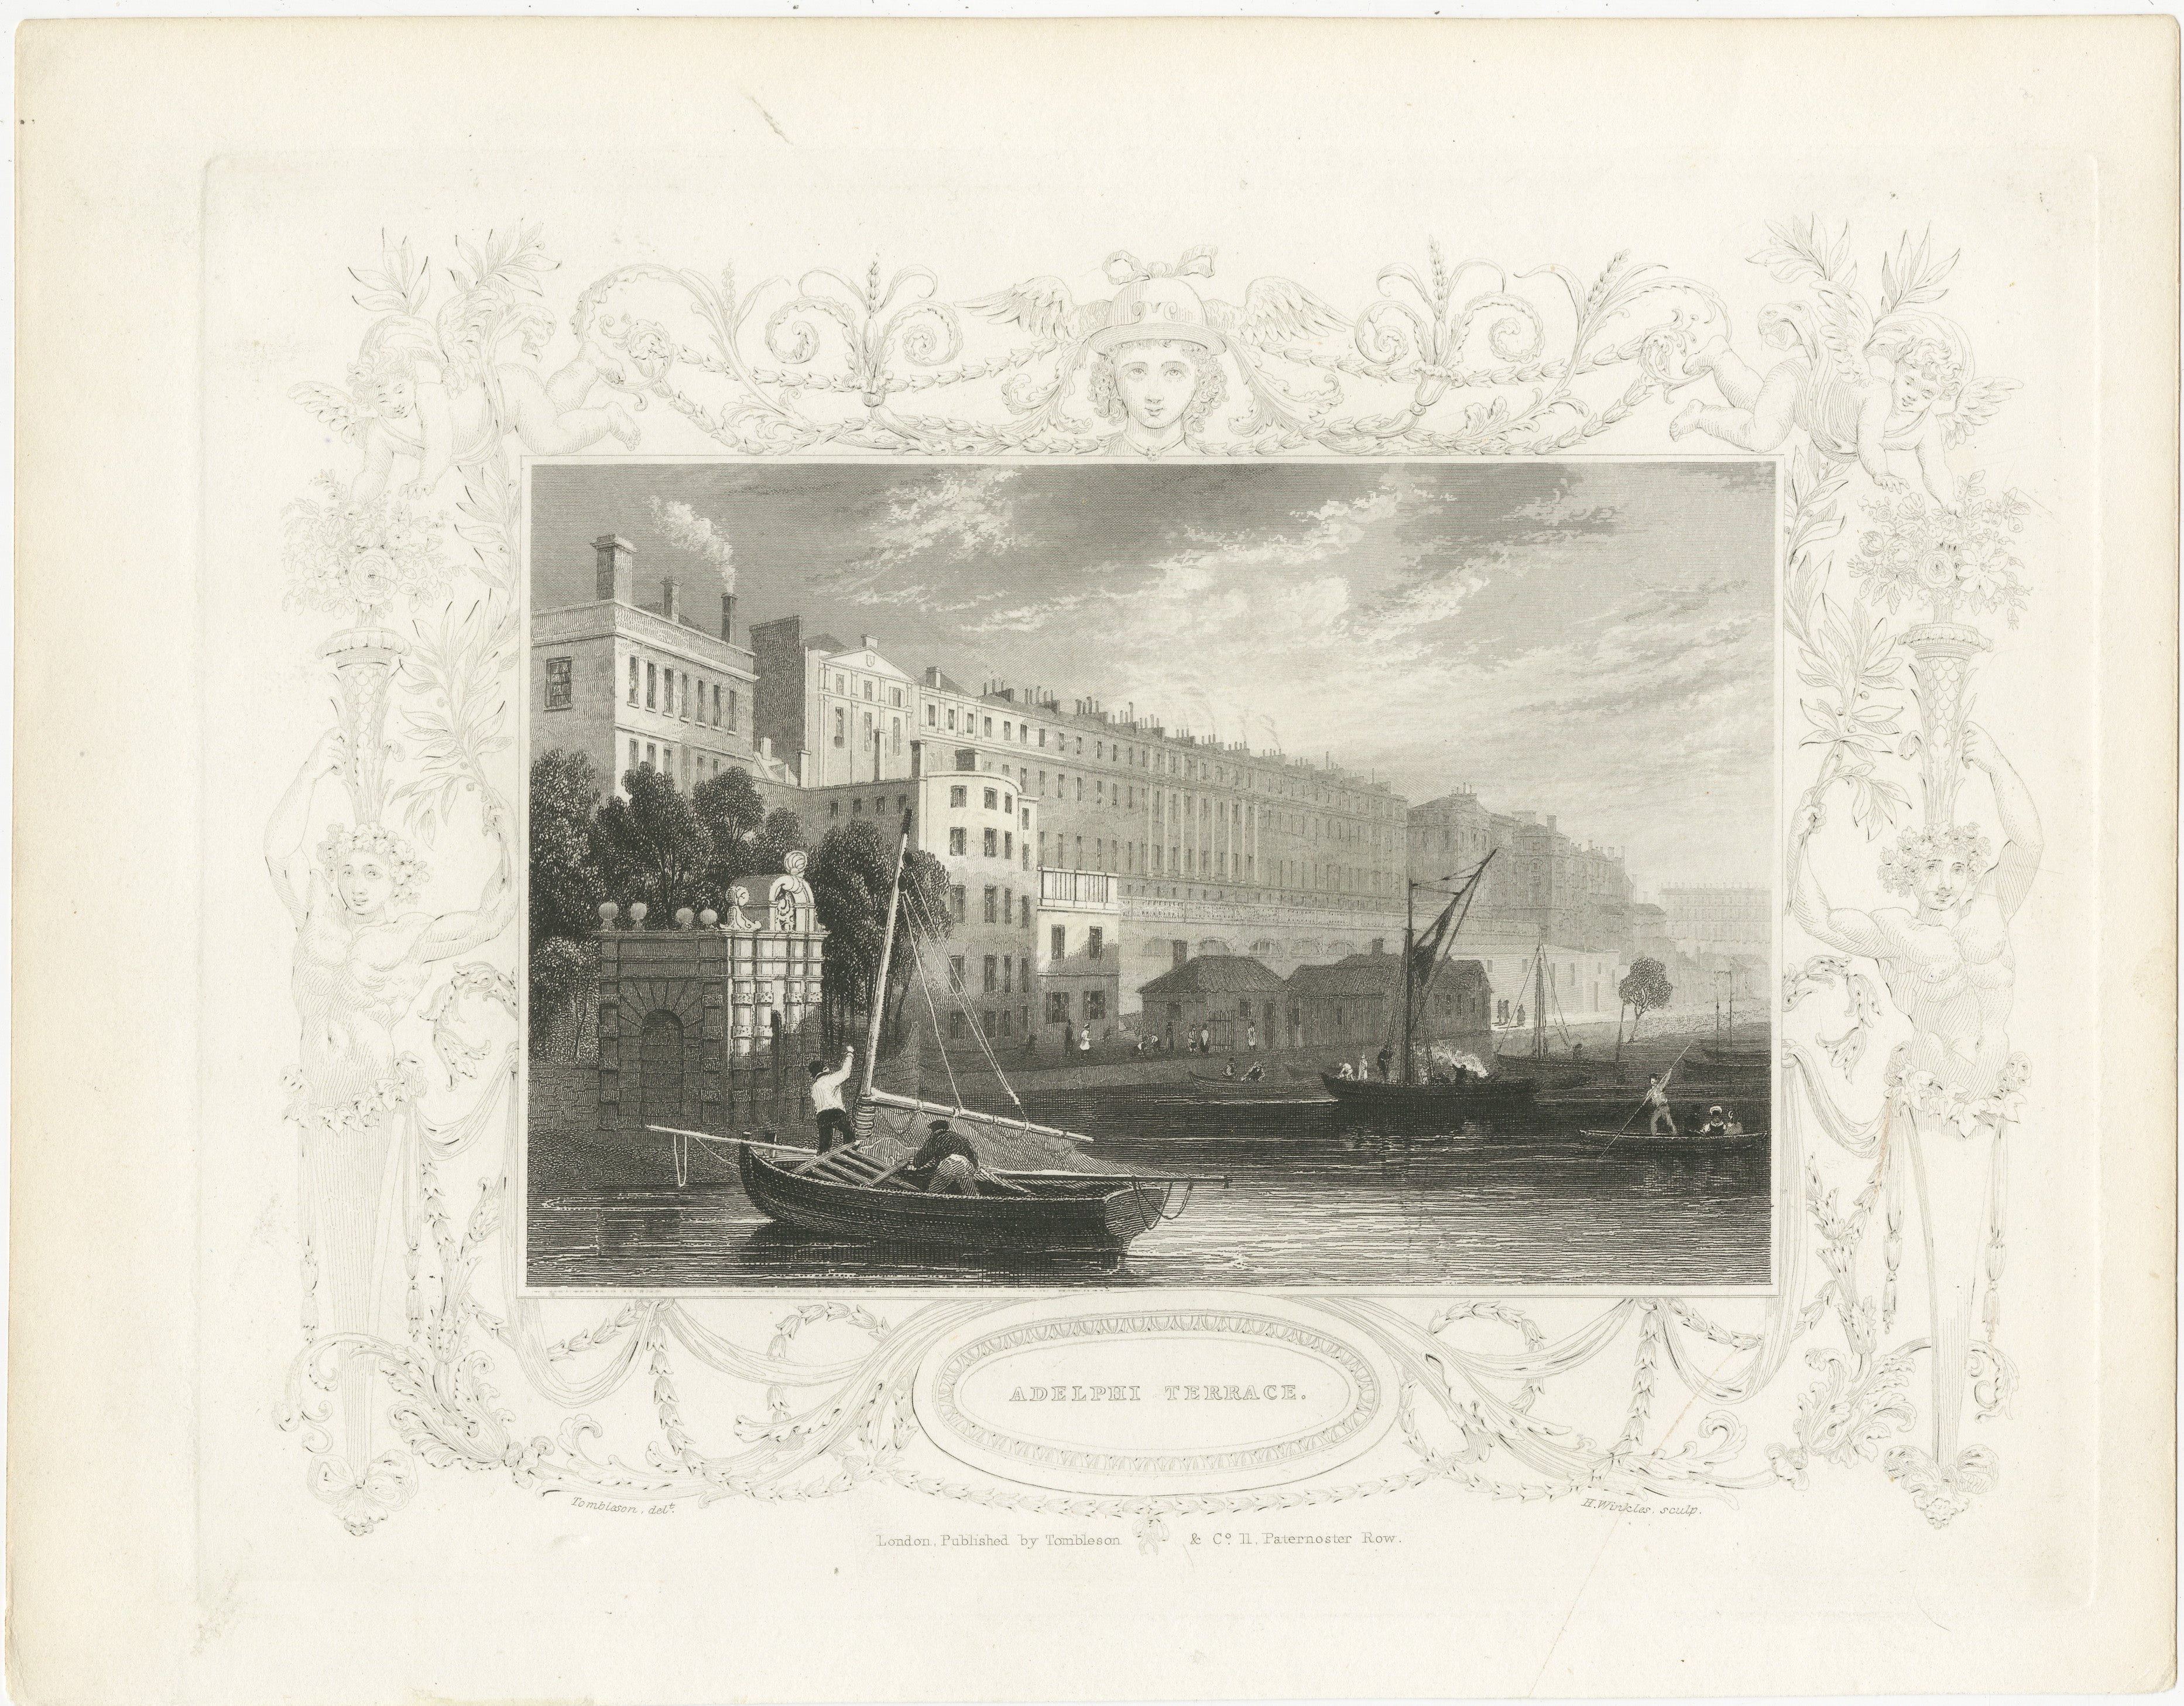 The engraving is an original uncolored print of Adelphi Terrace in London. This type of print would have been created by incising lines into a steel plate, which was then used to transfer ink onto paper. The absence of color means that the viewer's